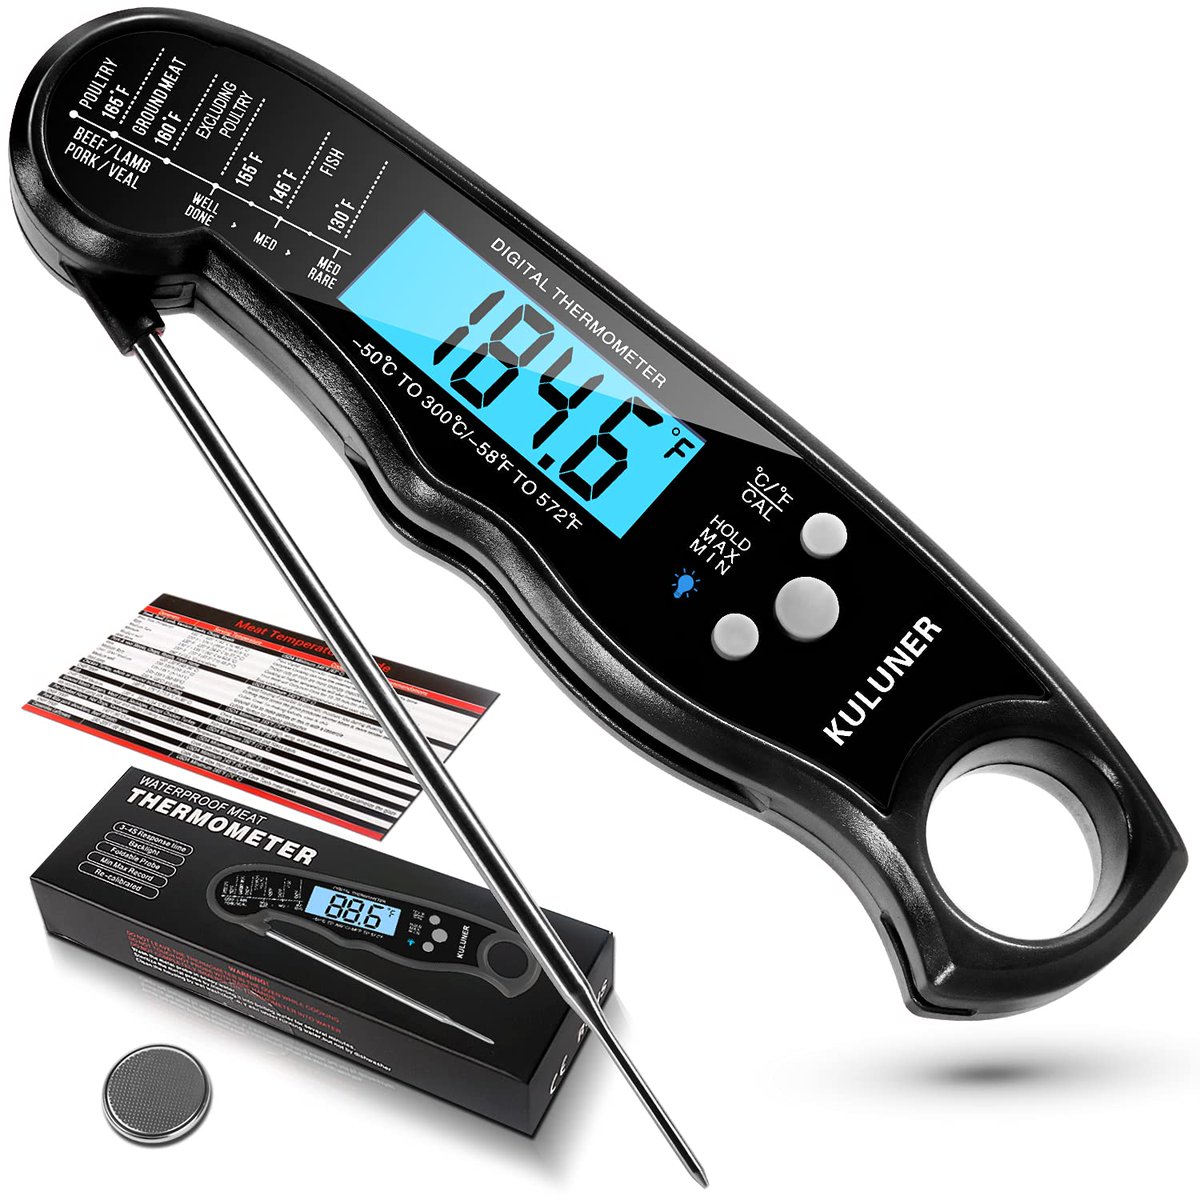 The 12 Best Instant Read Thermometers, Tested by Experts Read Full Review Here: topteneverworld.com/best-instant-r… #cookingthermometer #thermometer #foodthermometer #digitalmeatthermometer #digitalthermometer #meatthermometer #meat